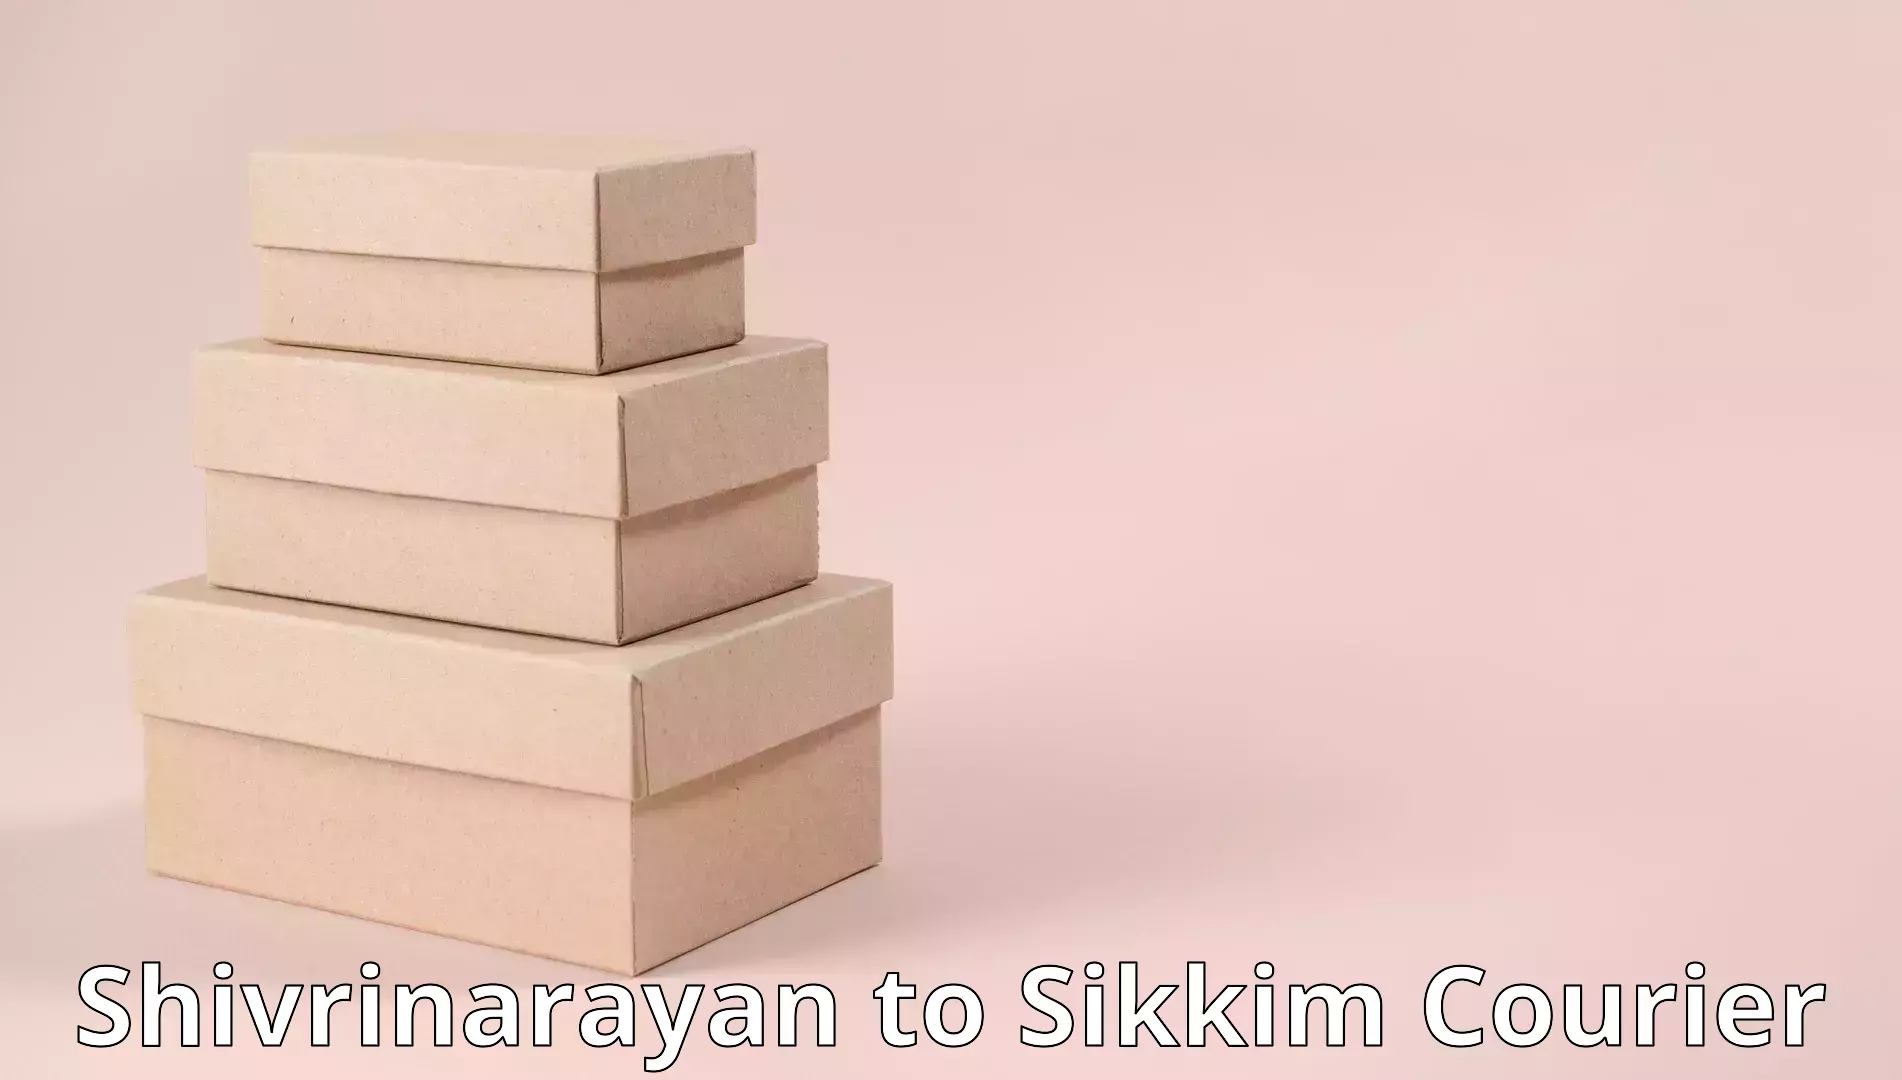 Home moving specialists Shivrinarayan to East Sikkim